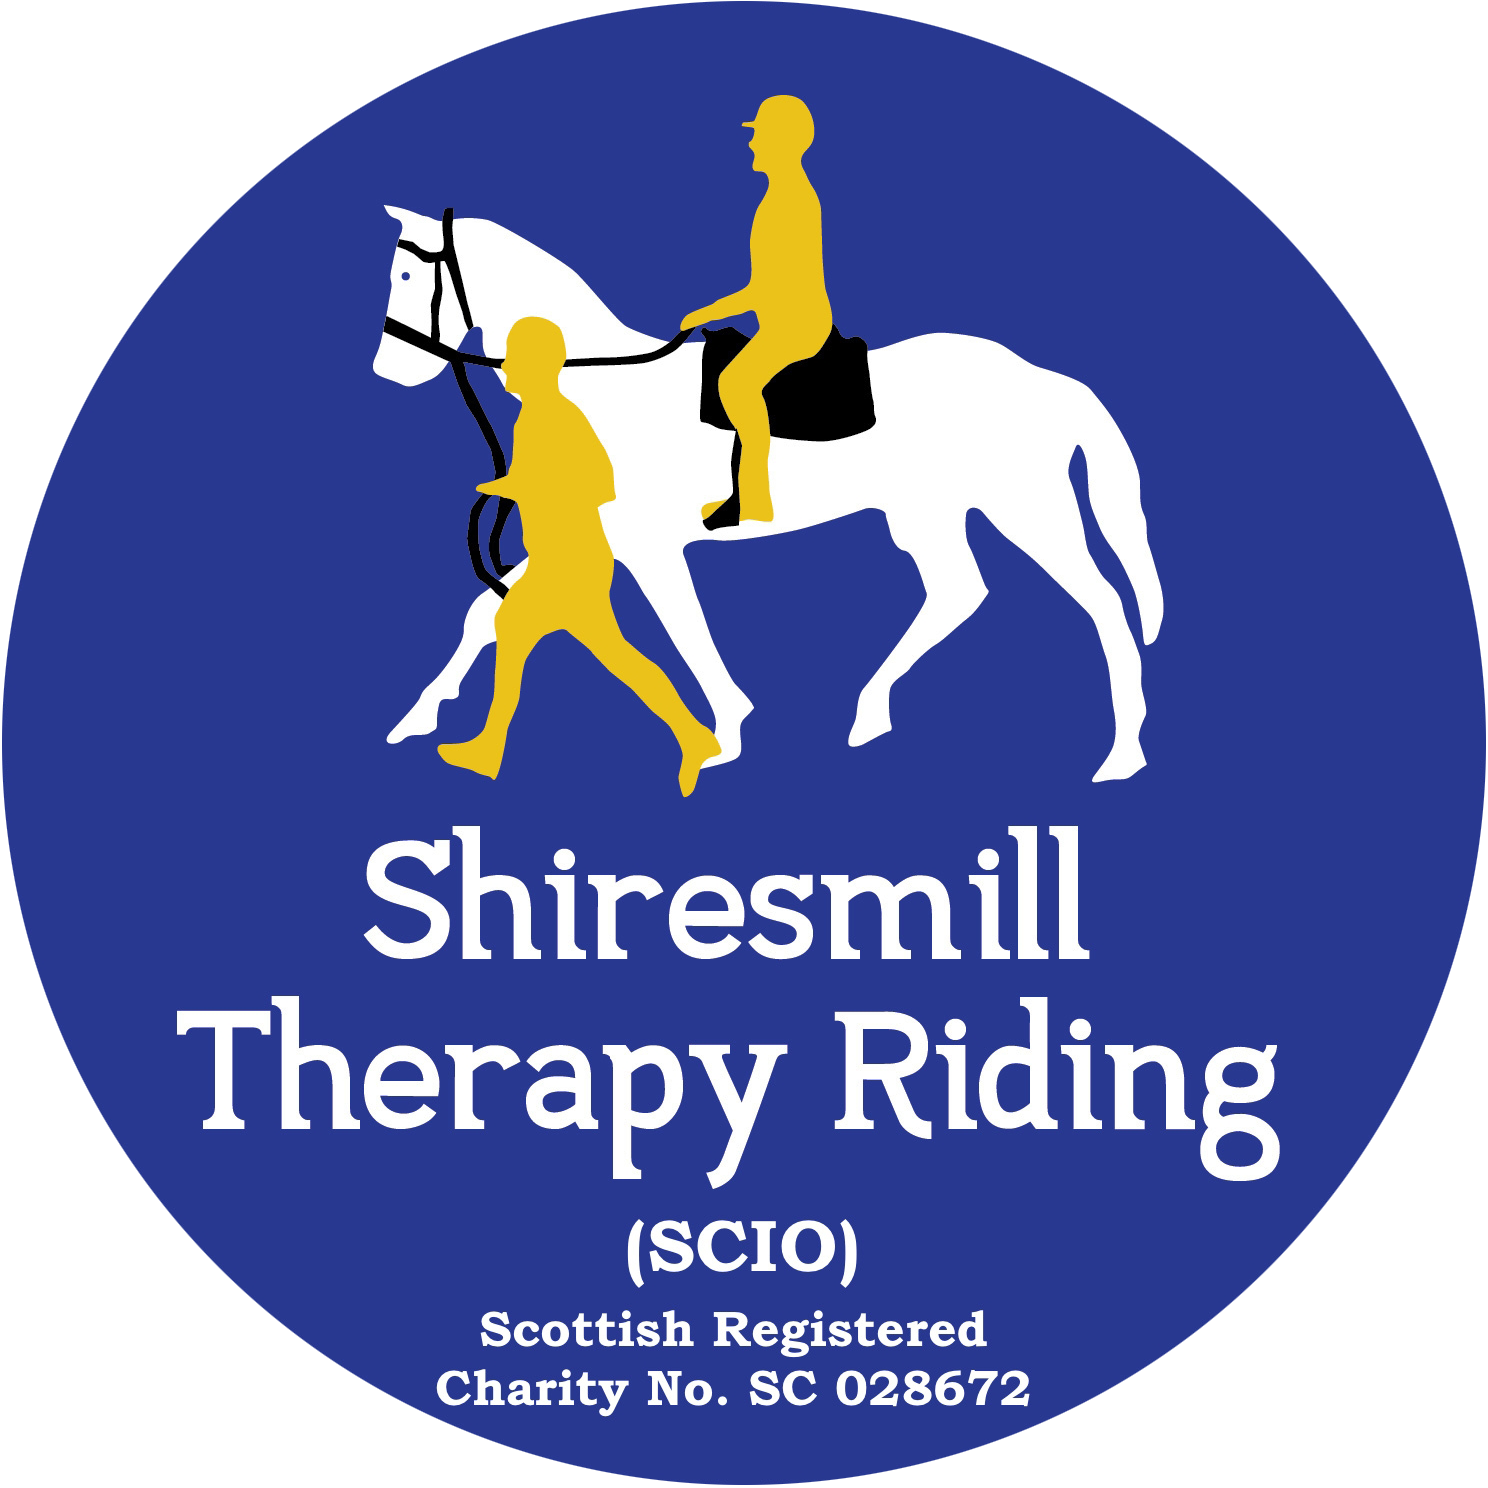 Shiresmill - Shiresmill Therapy Riding Centre in Fife, Scotland